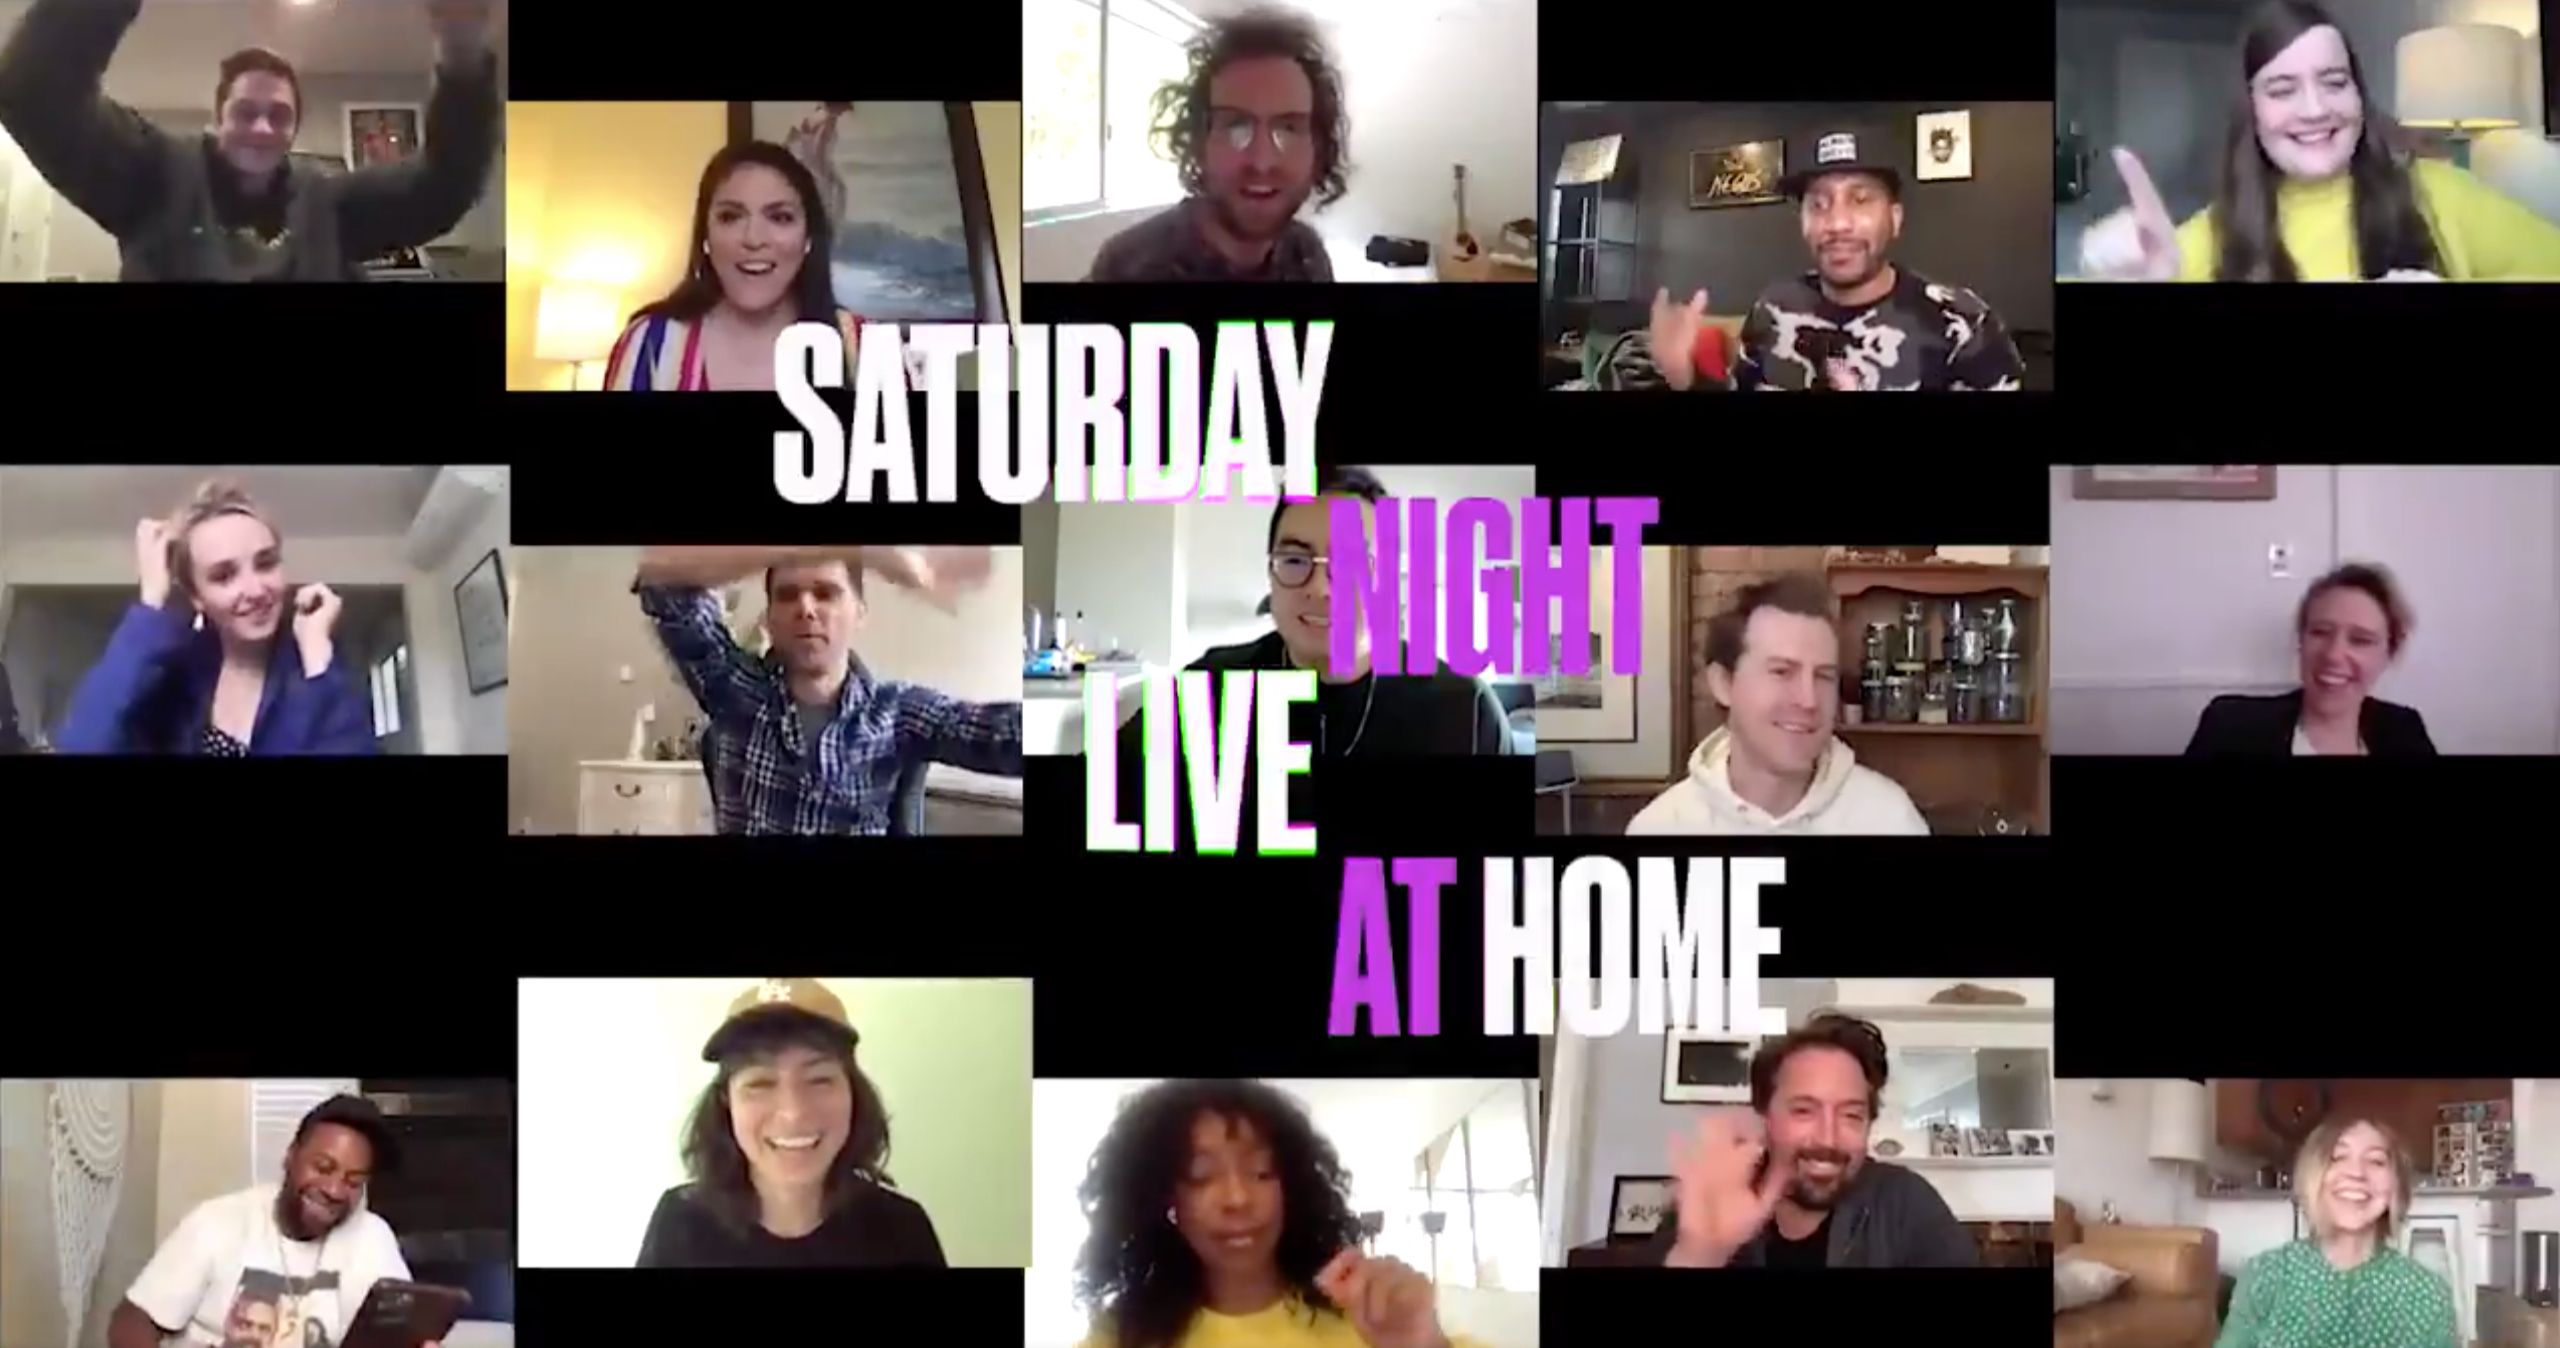 Second Saturday Night Live At-Home Episode Is Happening This Weekend